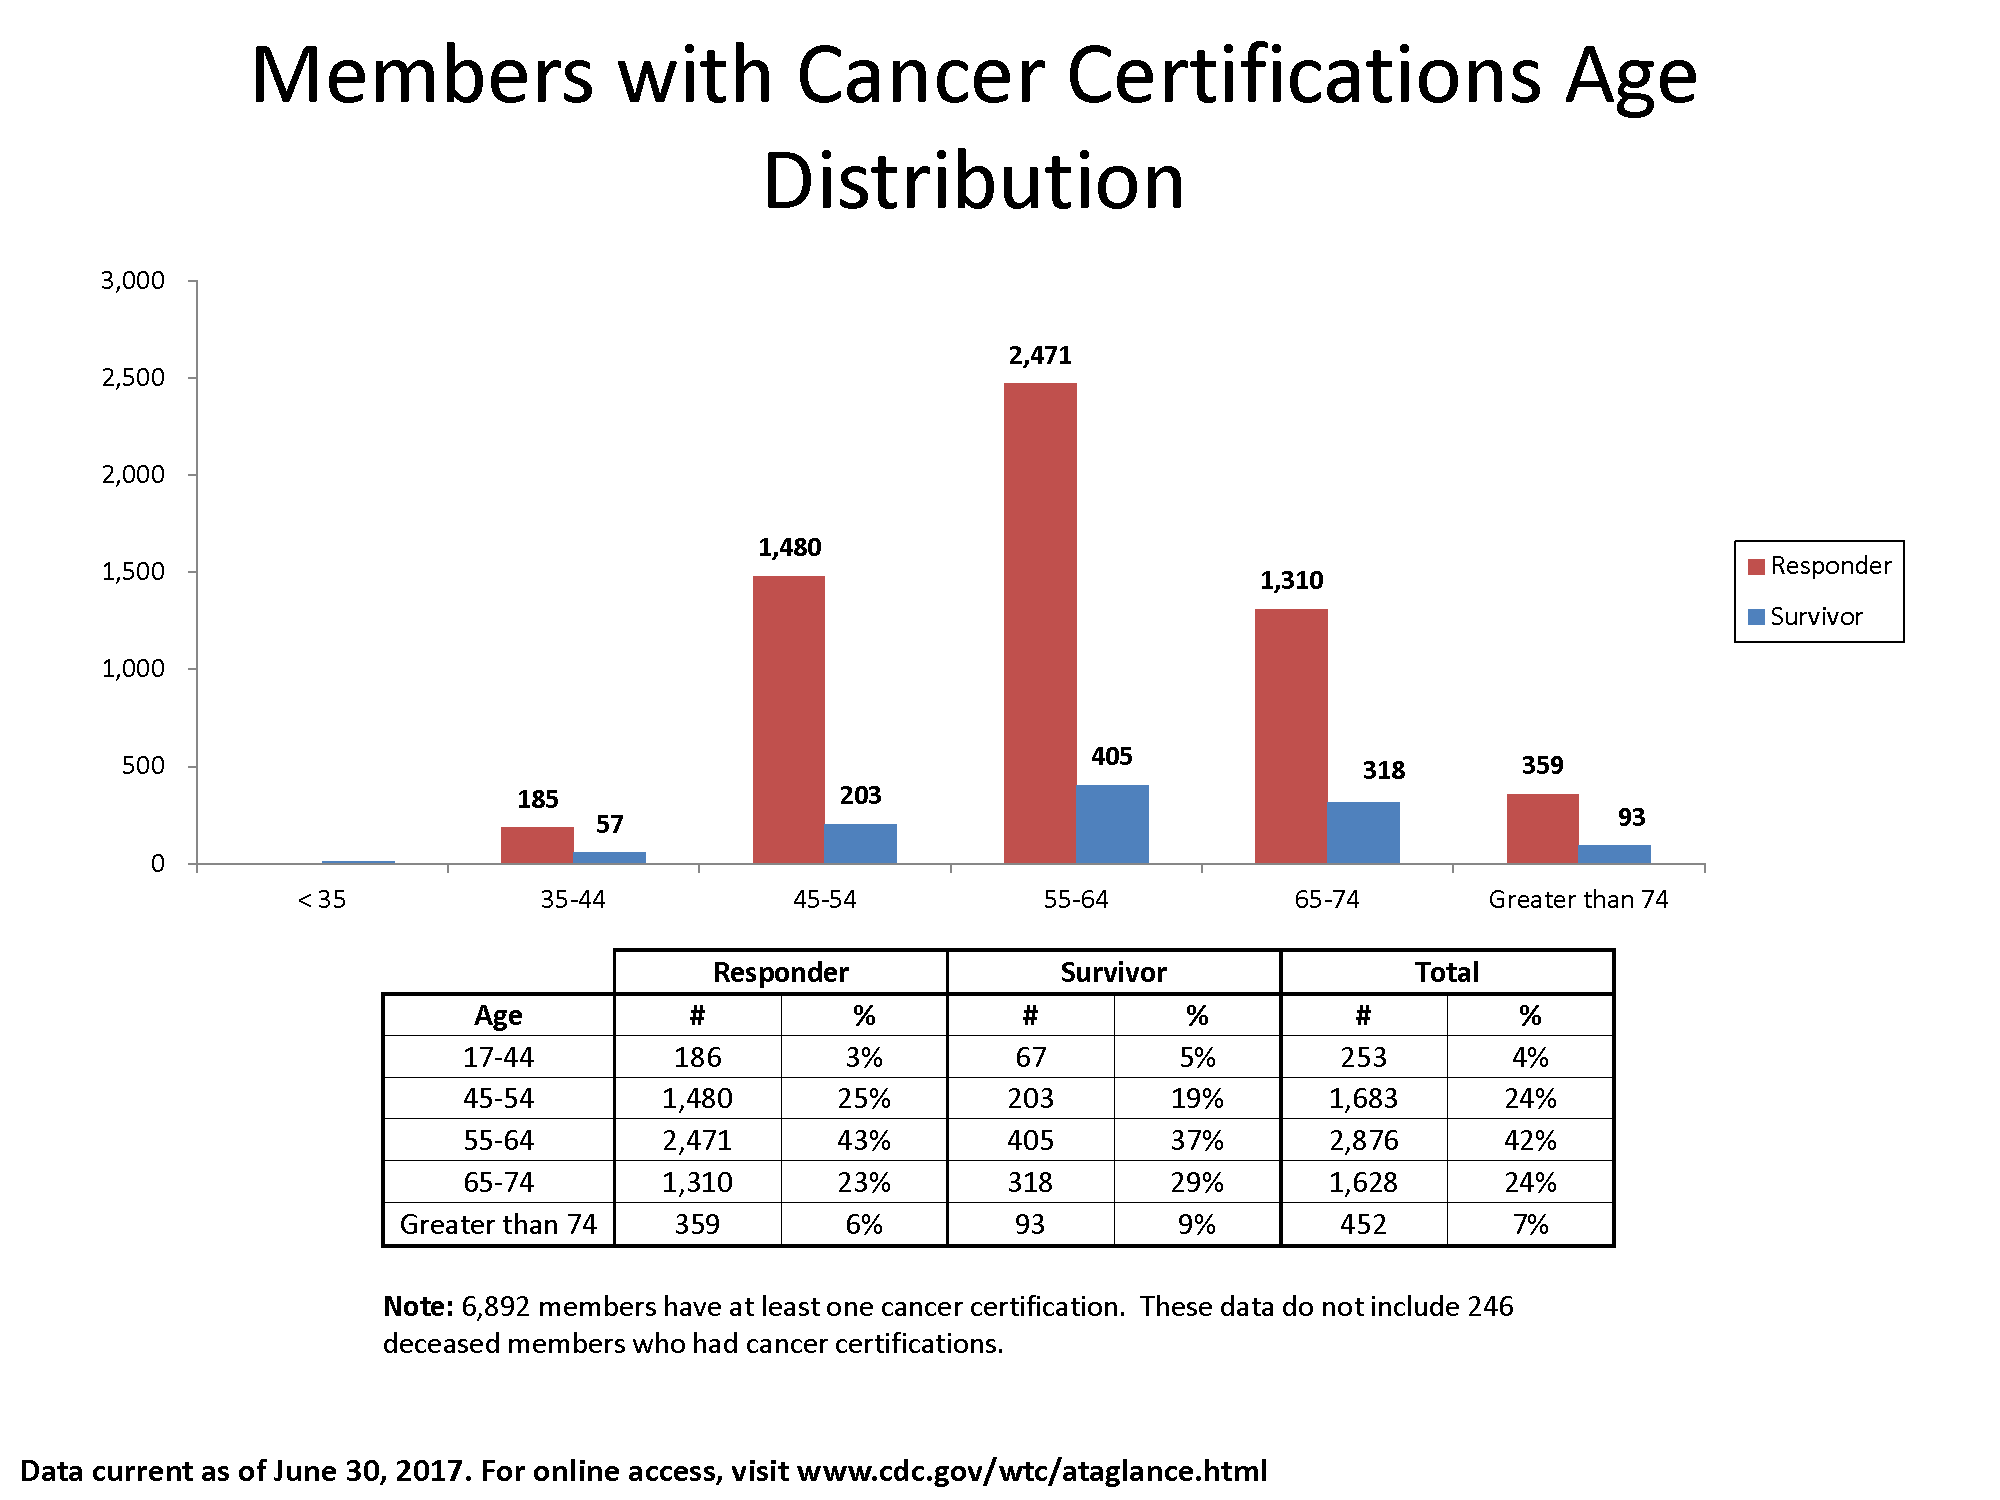 Bar chart of data in the table showing the number of members with cancer certifications by Responder and Survivor and age bracket.